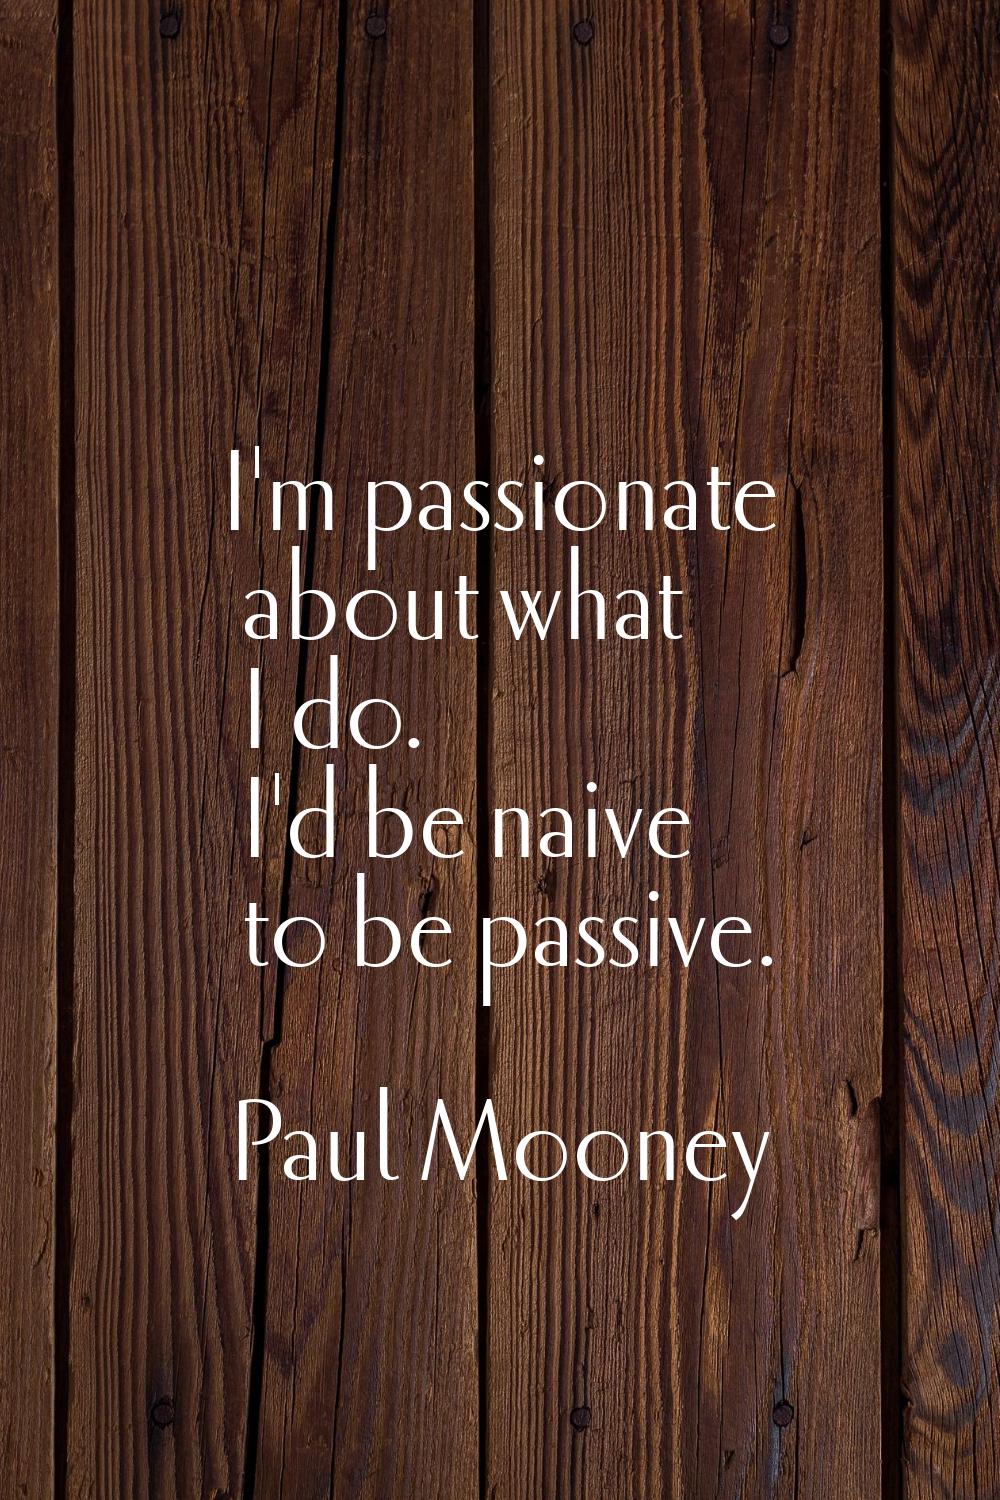 I'm passionate about what I do. I'd be naive to be passive.